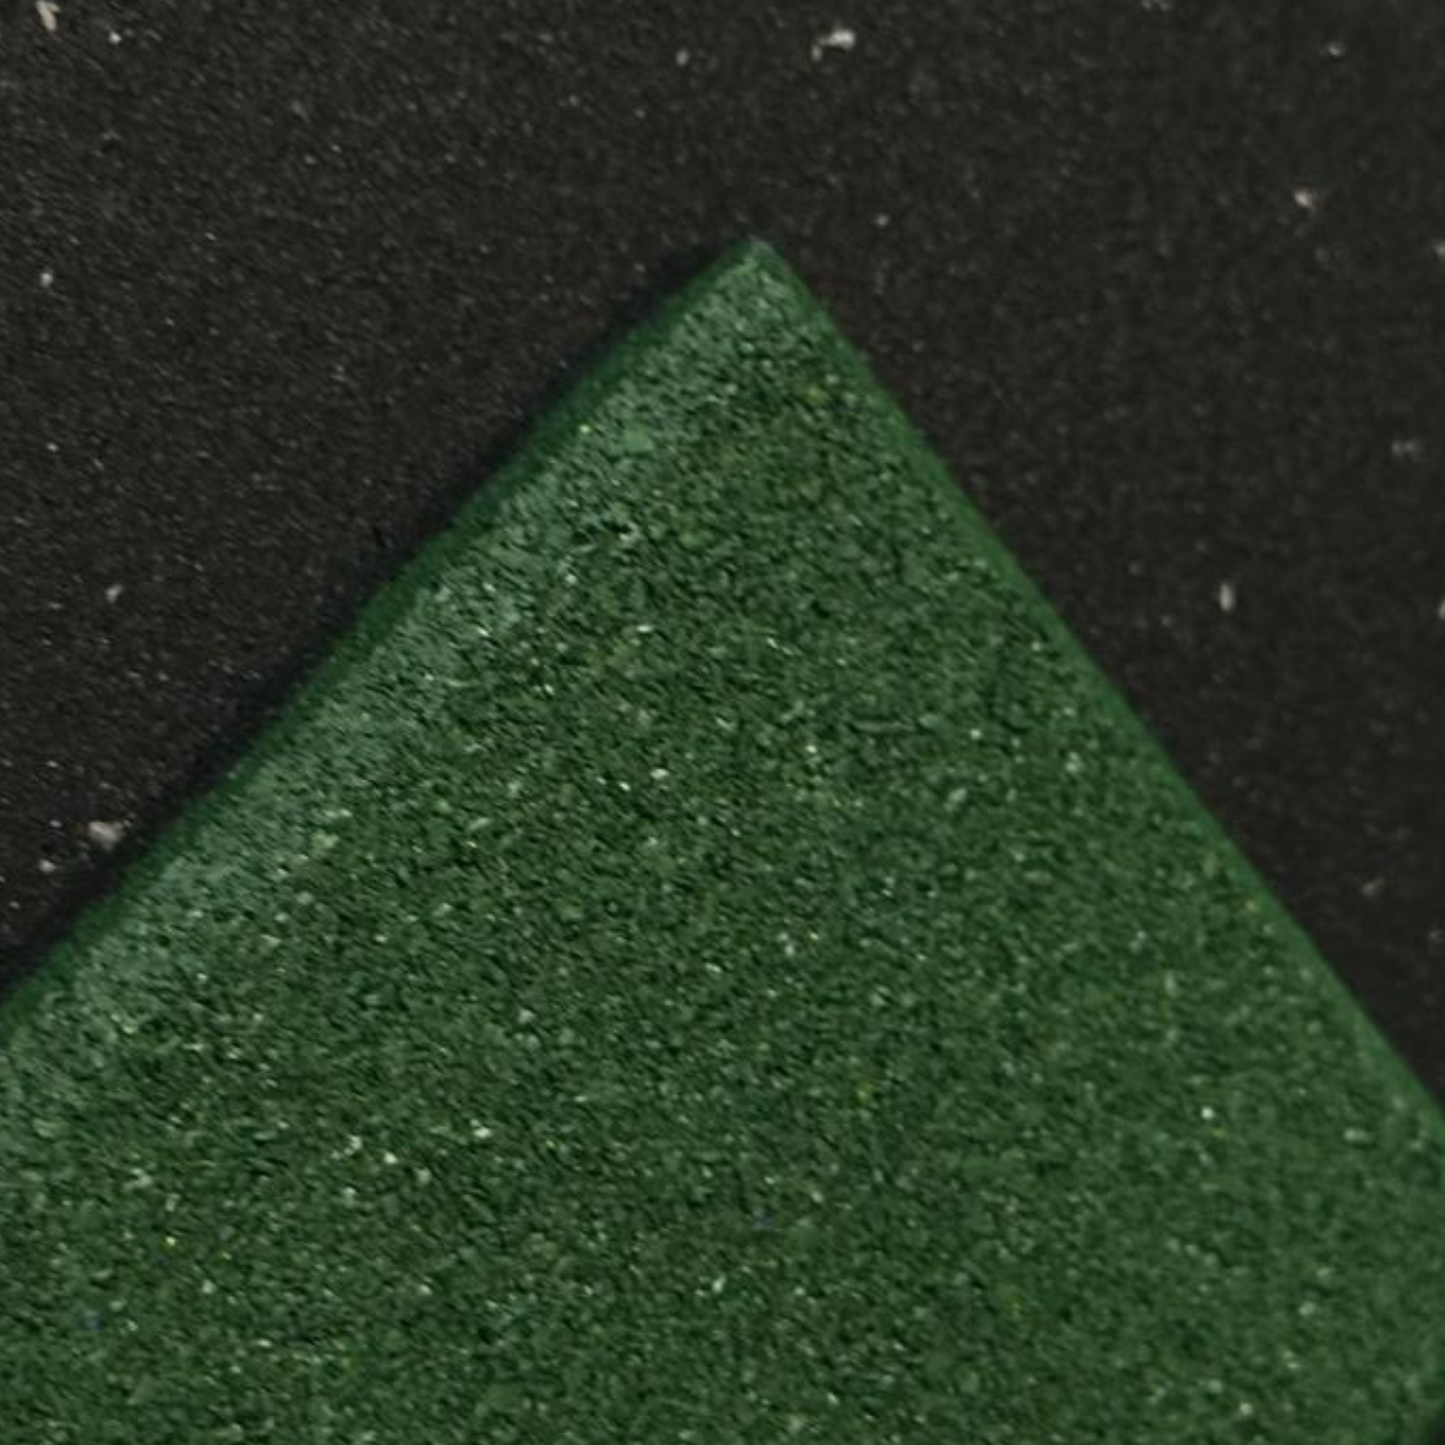 Commercial Rubber Gym Flooring - Green (1000mm x 1000mm x 15mm)